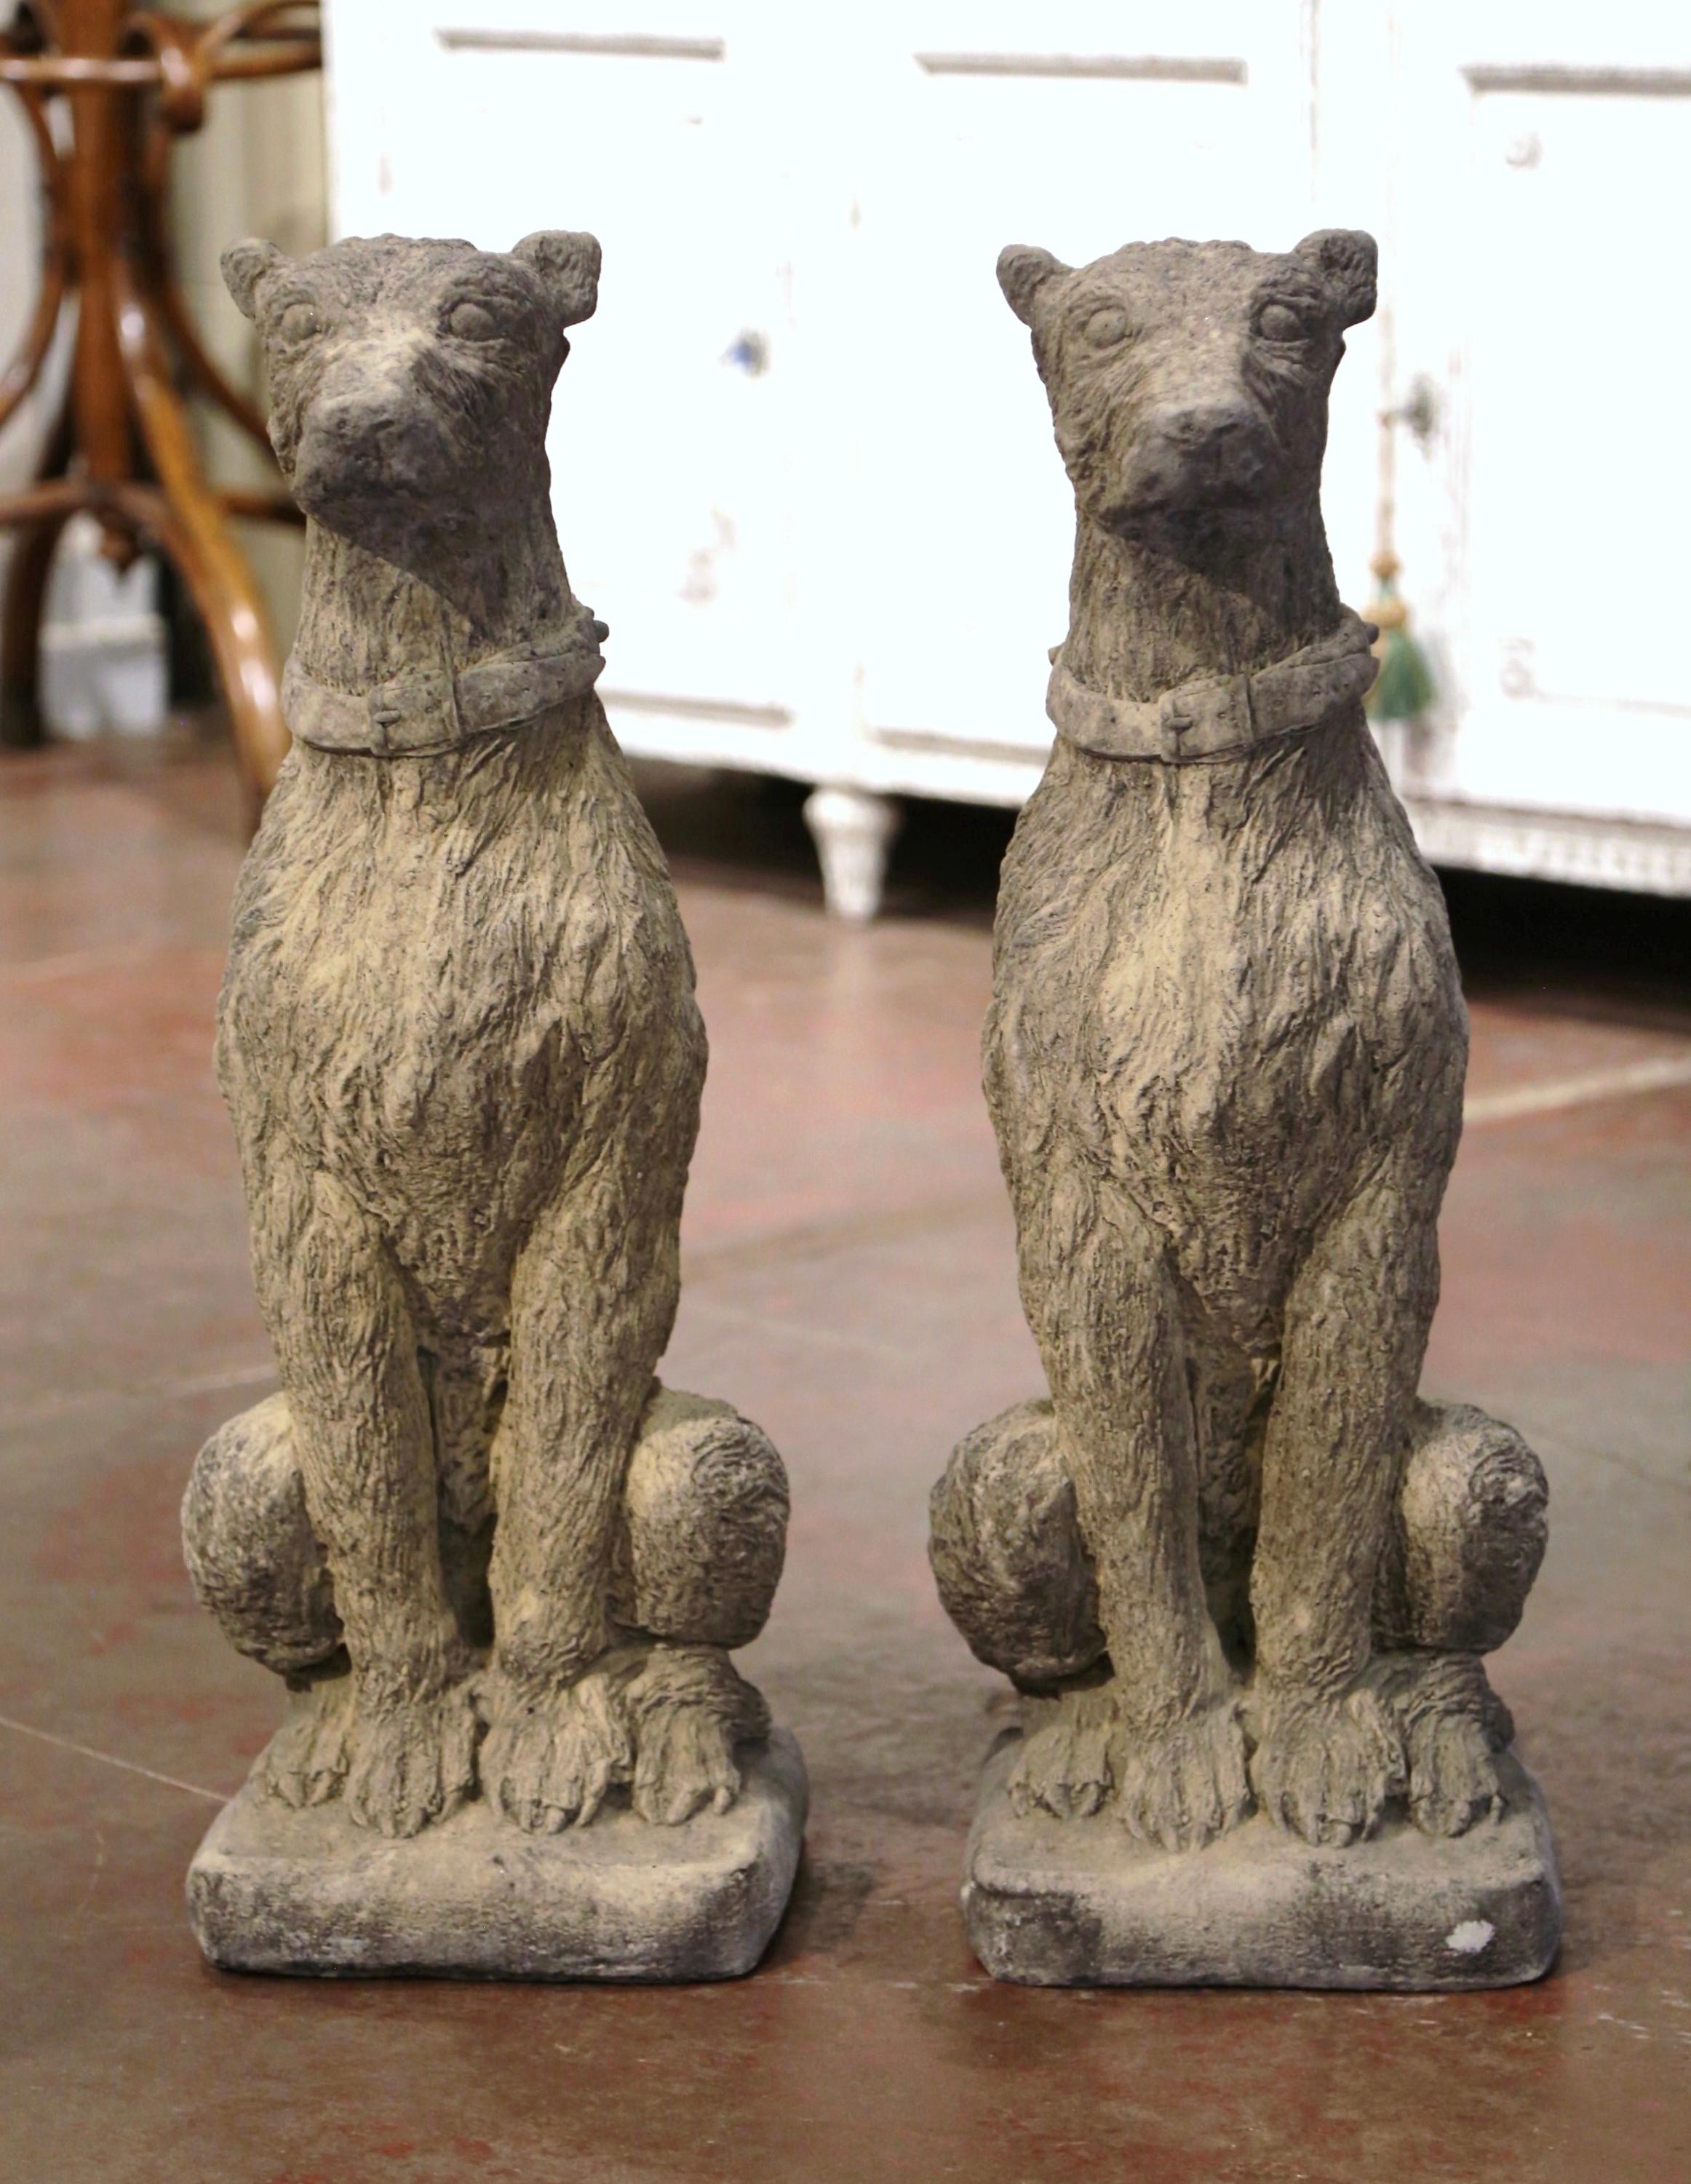 Carved of stone circa 2000, the tall vintage deerhounds are set on a flat square base; sited on their back legs, both canines have a proud expression with detailed fur and further embellished with a collar around their neck. The garden sculpted